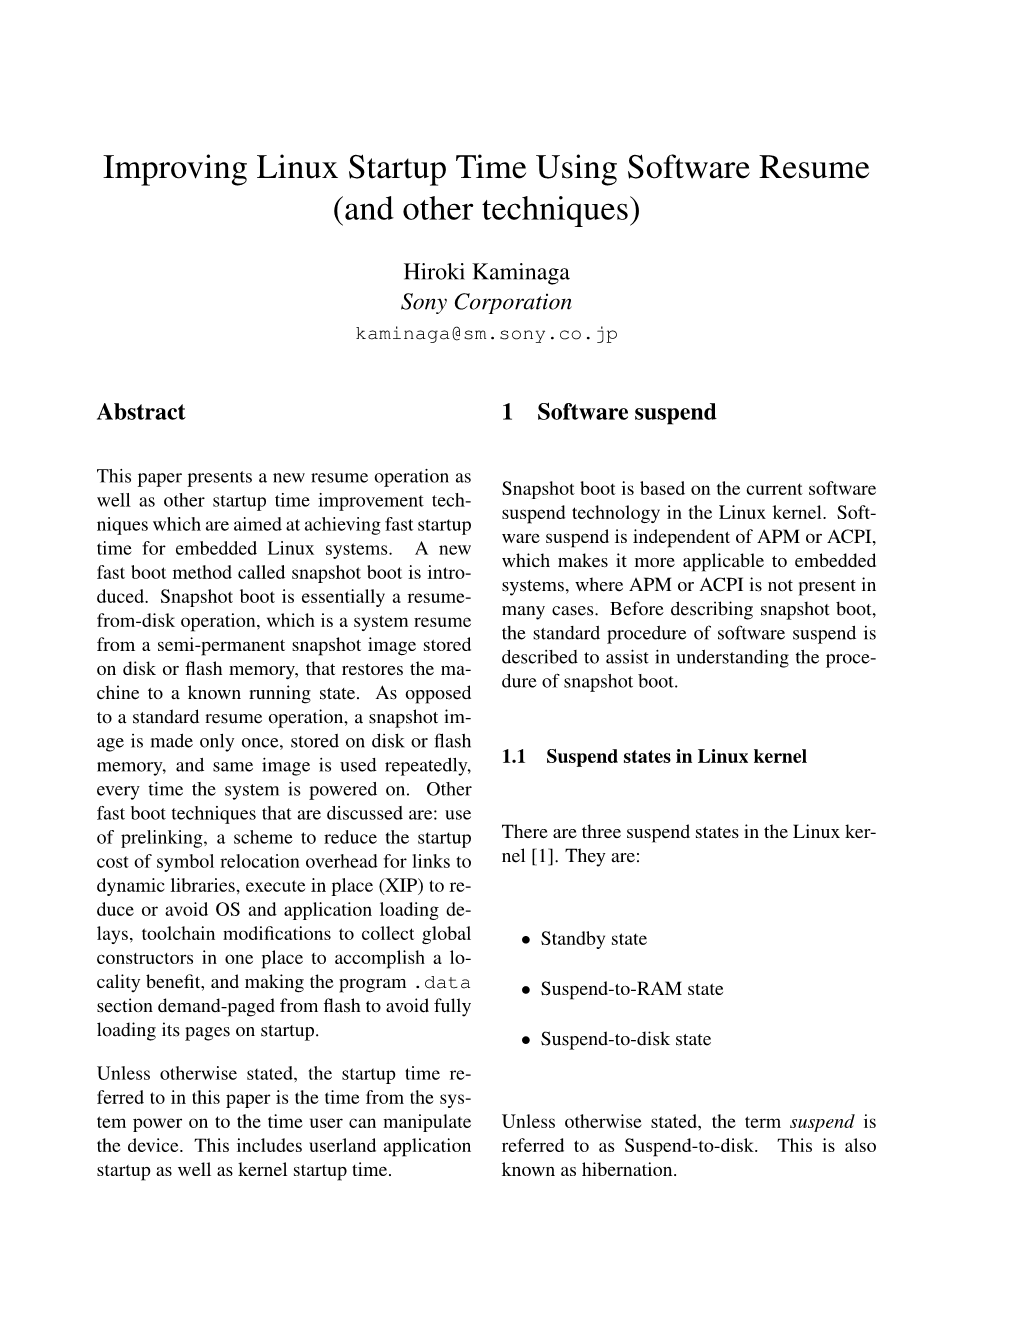 Improving Linux Startup Time Using Software Resume (And Other Techniques)